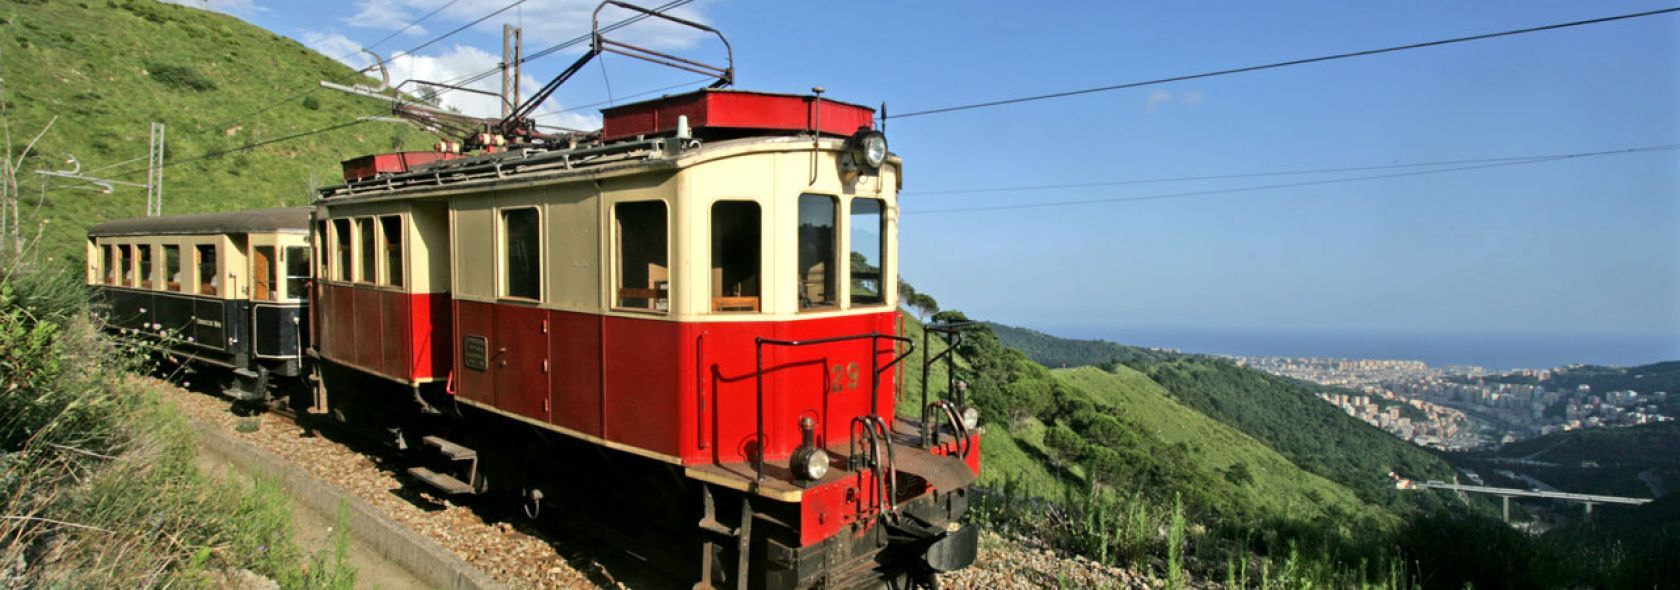 Little train, salami and fantasy – The little train of Casella: between the valleys of Genoa